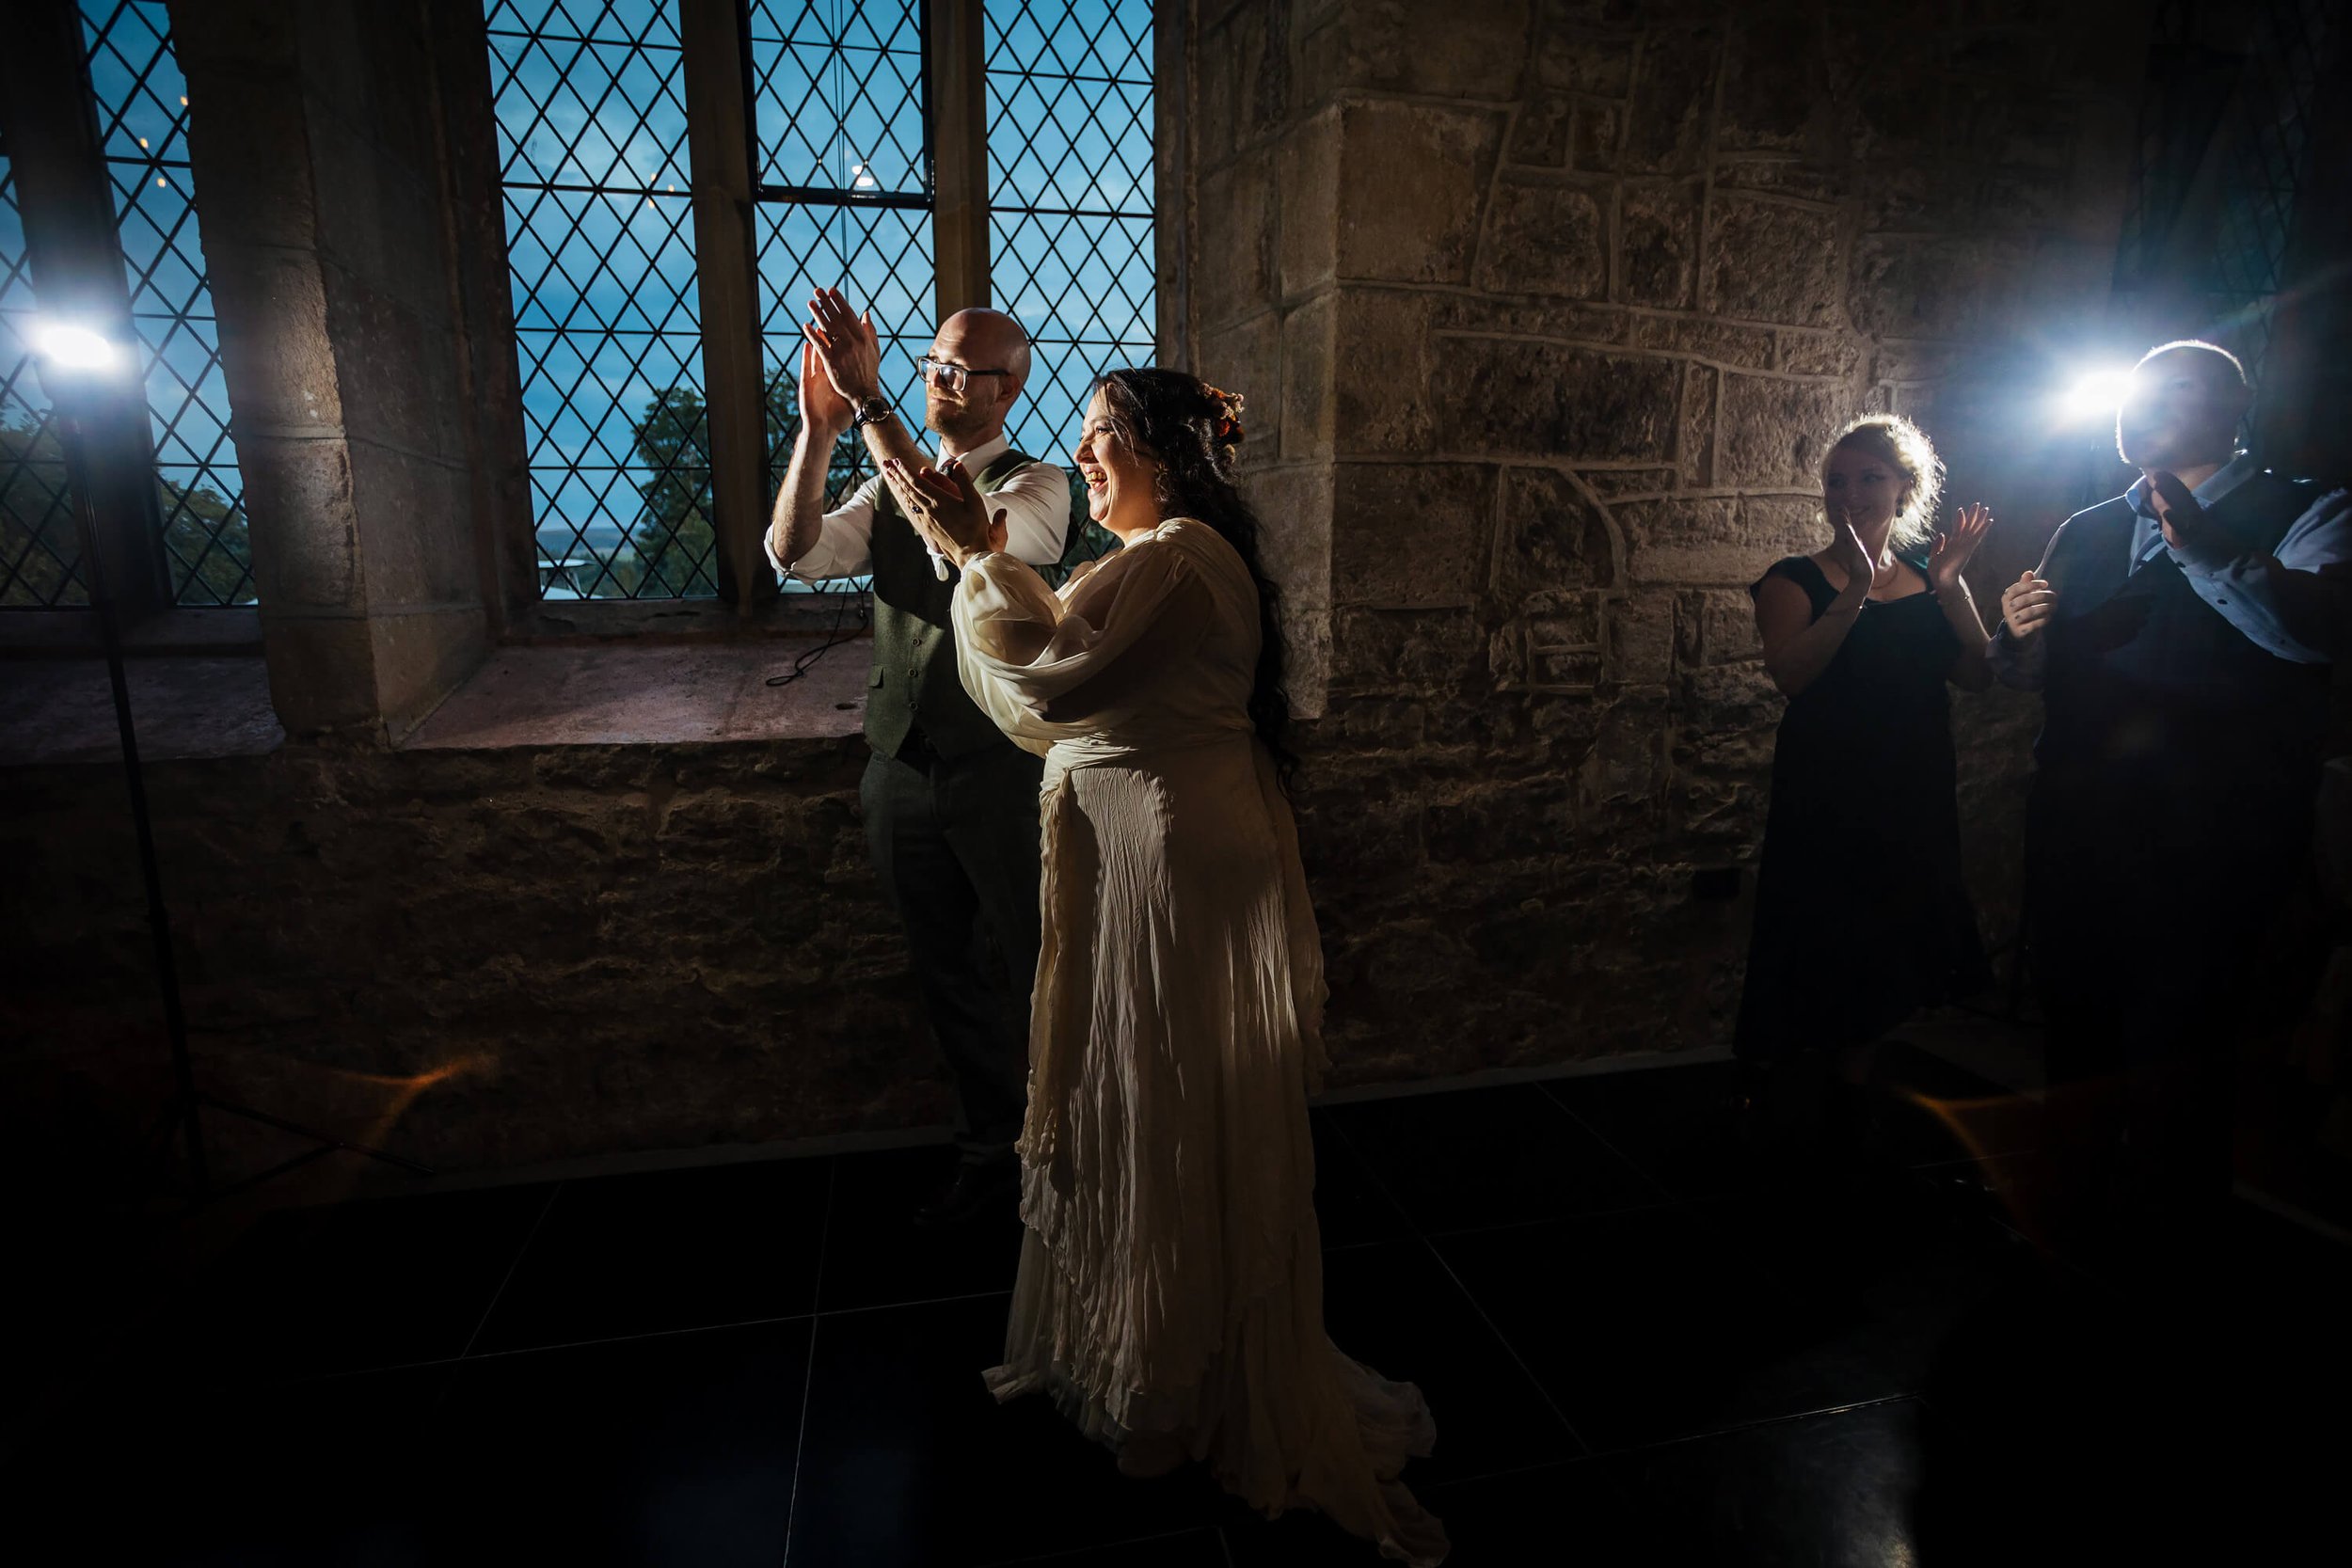 On the dance floor at a Barden Tower wedding